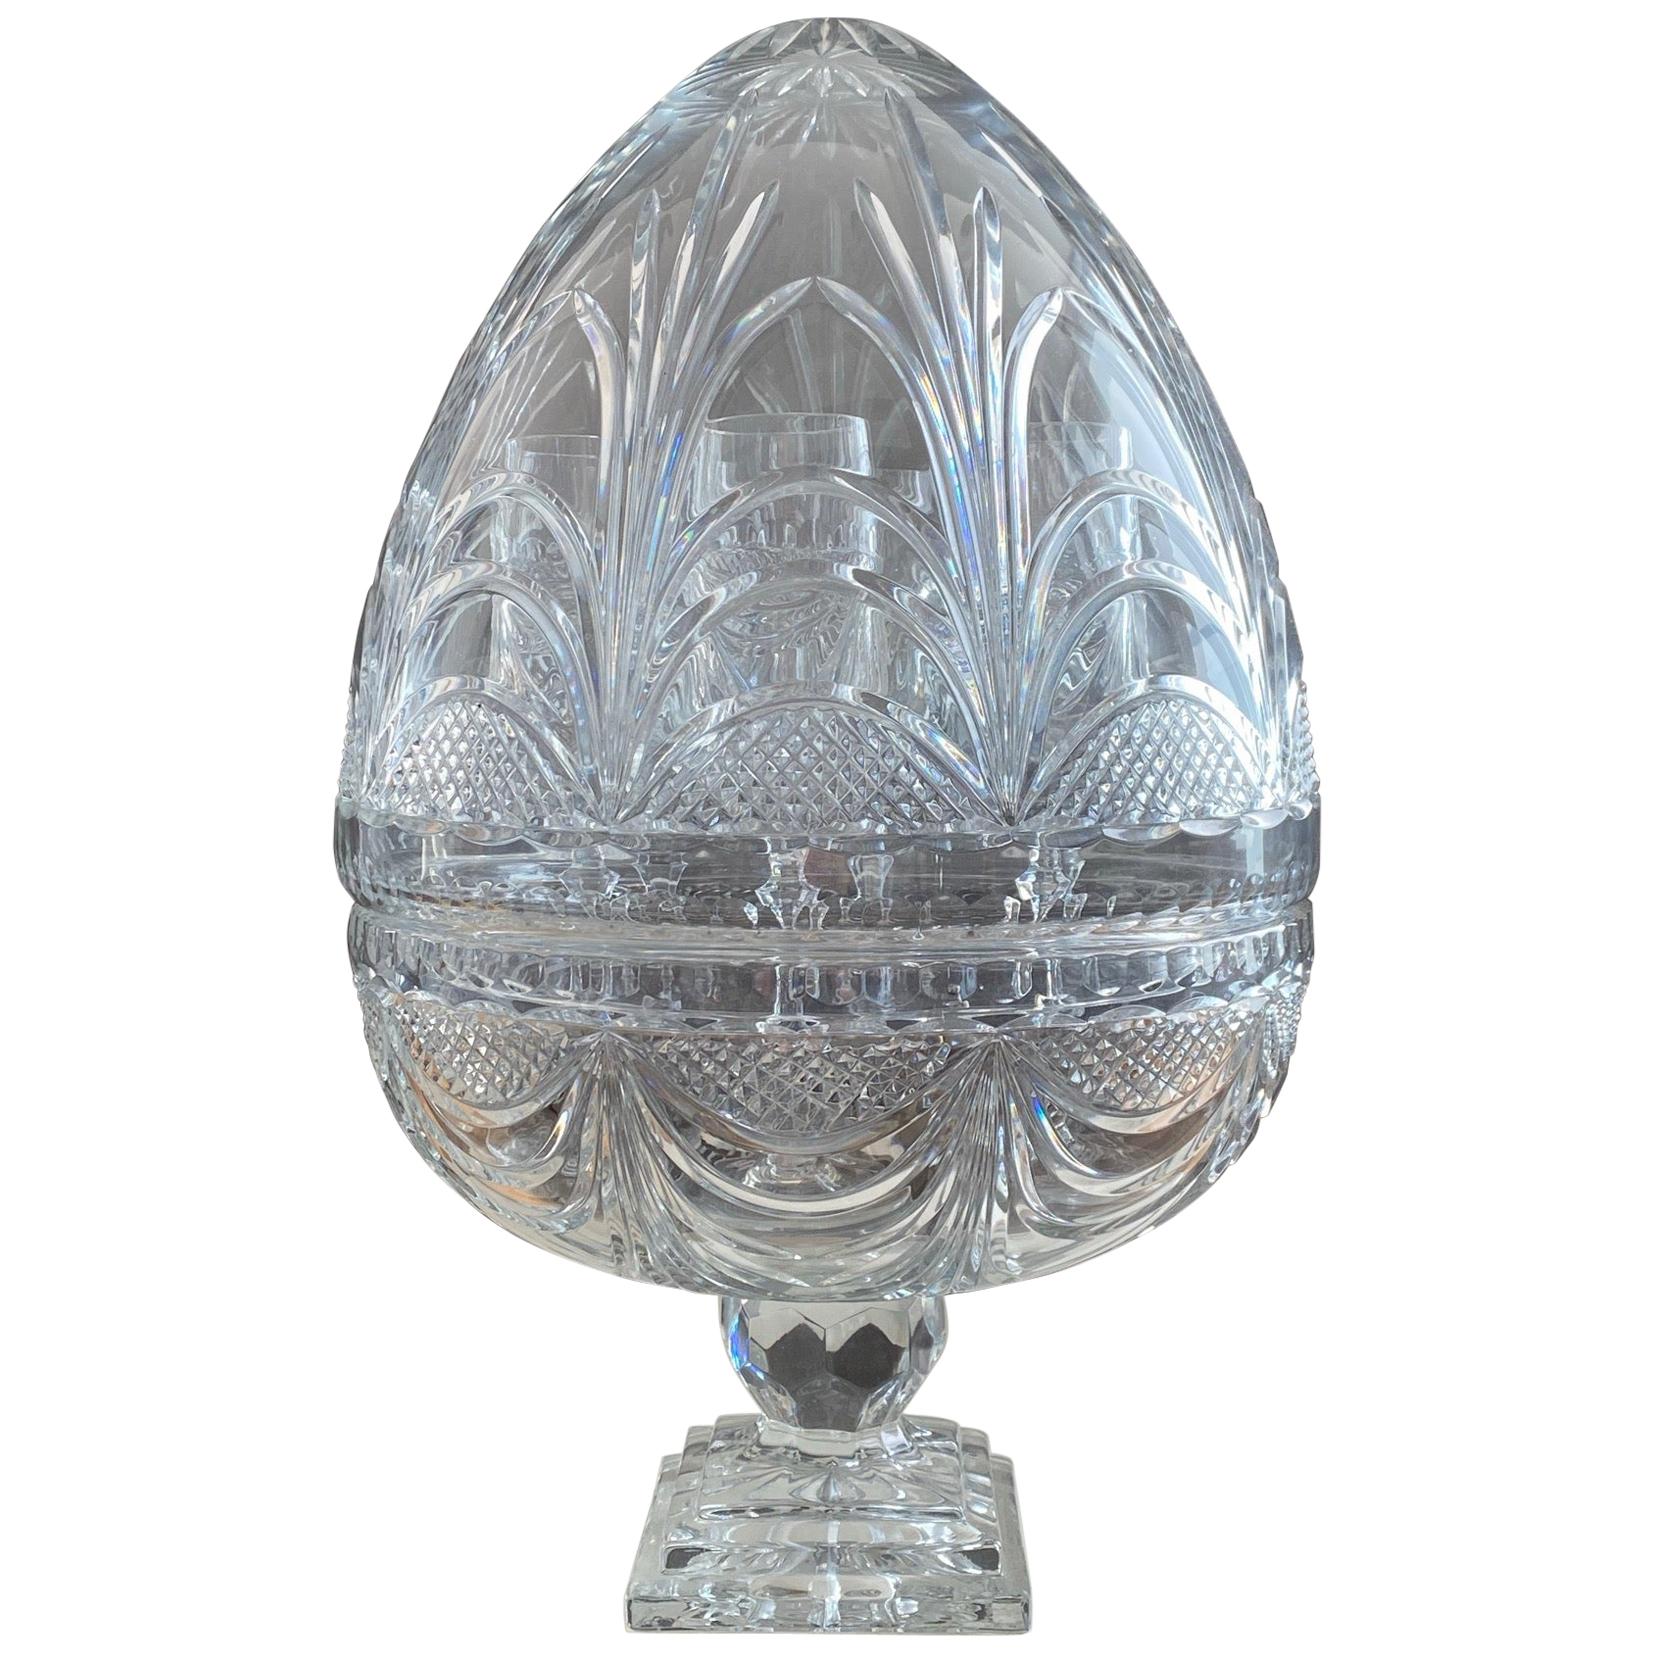 Crystal Egg Champagne Cellar, Lorrain Crystal Glassware, from circa 70s'- 80s' For Sale